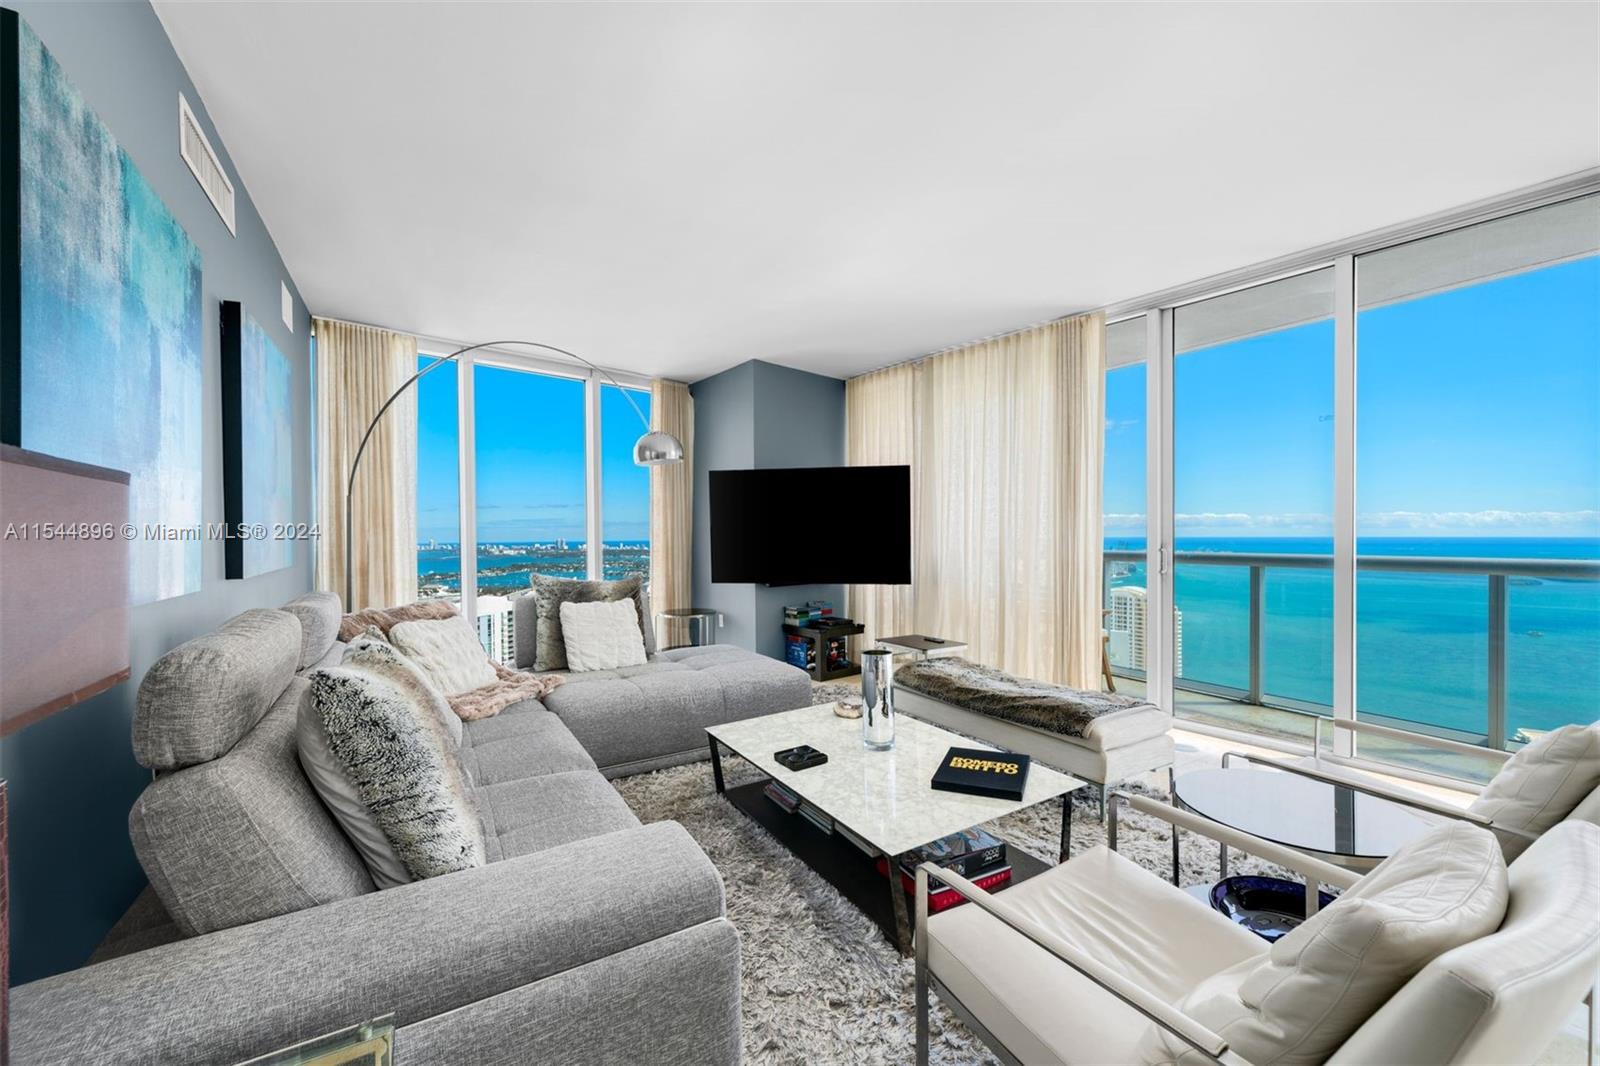 A magnificent combination residence located on the 53rd floor of Icon Brickell Tower 1 w/ 5 bedrooms, 4.5 baths, 2 kitchens, 2 laundry closets, 2 assigned parking spaces, 3090 int sq ft, 451 sq ft of balcony, and 10-ft-high ceilings w/ sweeping views of the bay, city, ocean, and river. Connected by an adjoining door, the 2 units feature marble flooring throughout the main living areas, wood flooring in all bedrooms, and high-end kitchen appliances by Wolf & Sub-Zero. Building amenities include a 2-acre pool deck w/ a 50-person hot tub & 300-ft-long swimming pool, fitness center, full-service spa w/ sauna & steam rooms, on-site restaurants, valet parking, and full-service concierge. Within walking distance of Whole Foods, Silverspot Cinema, Mary Brickell Village, and Brickell City Centre.